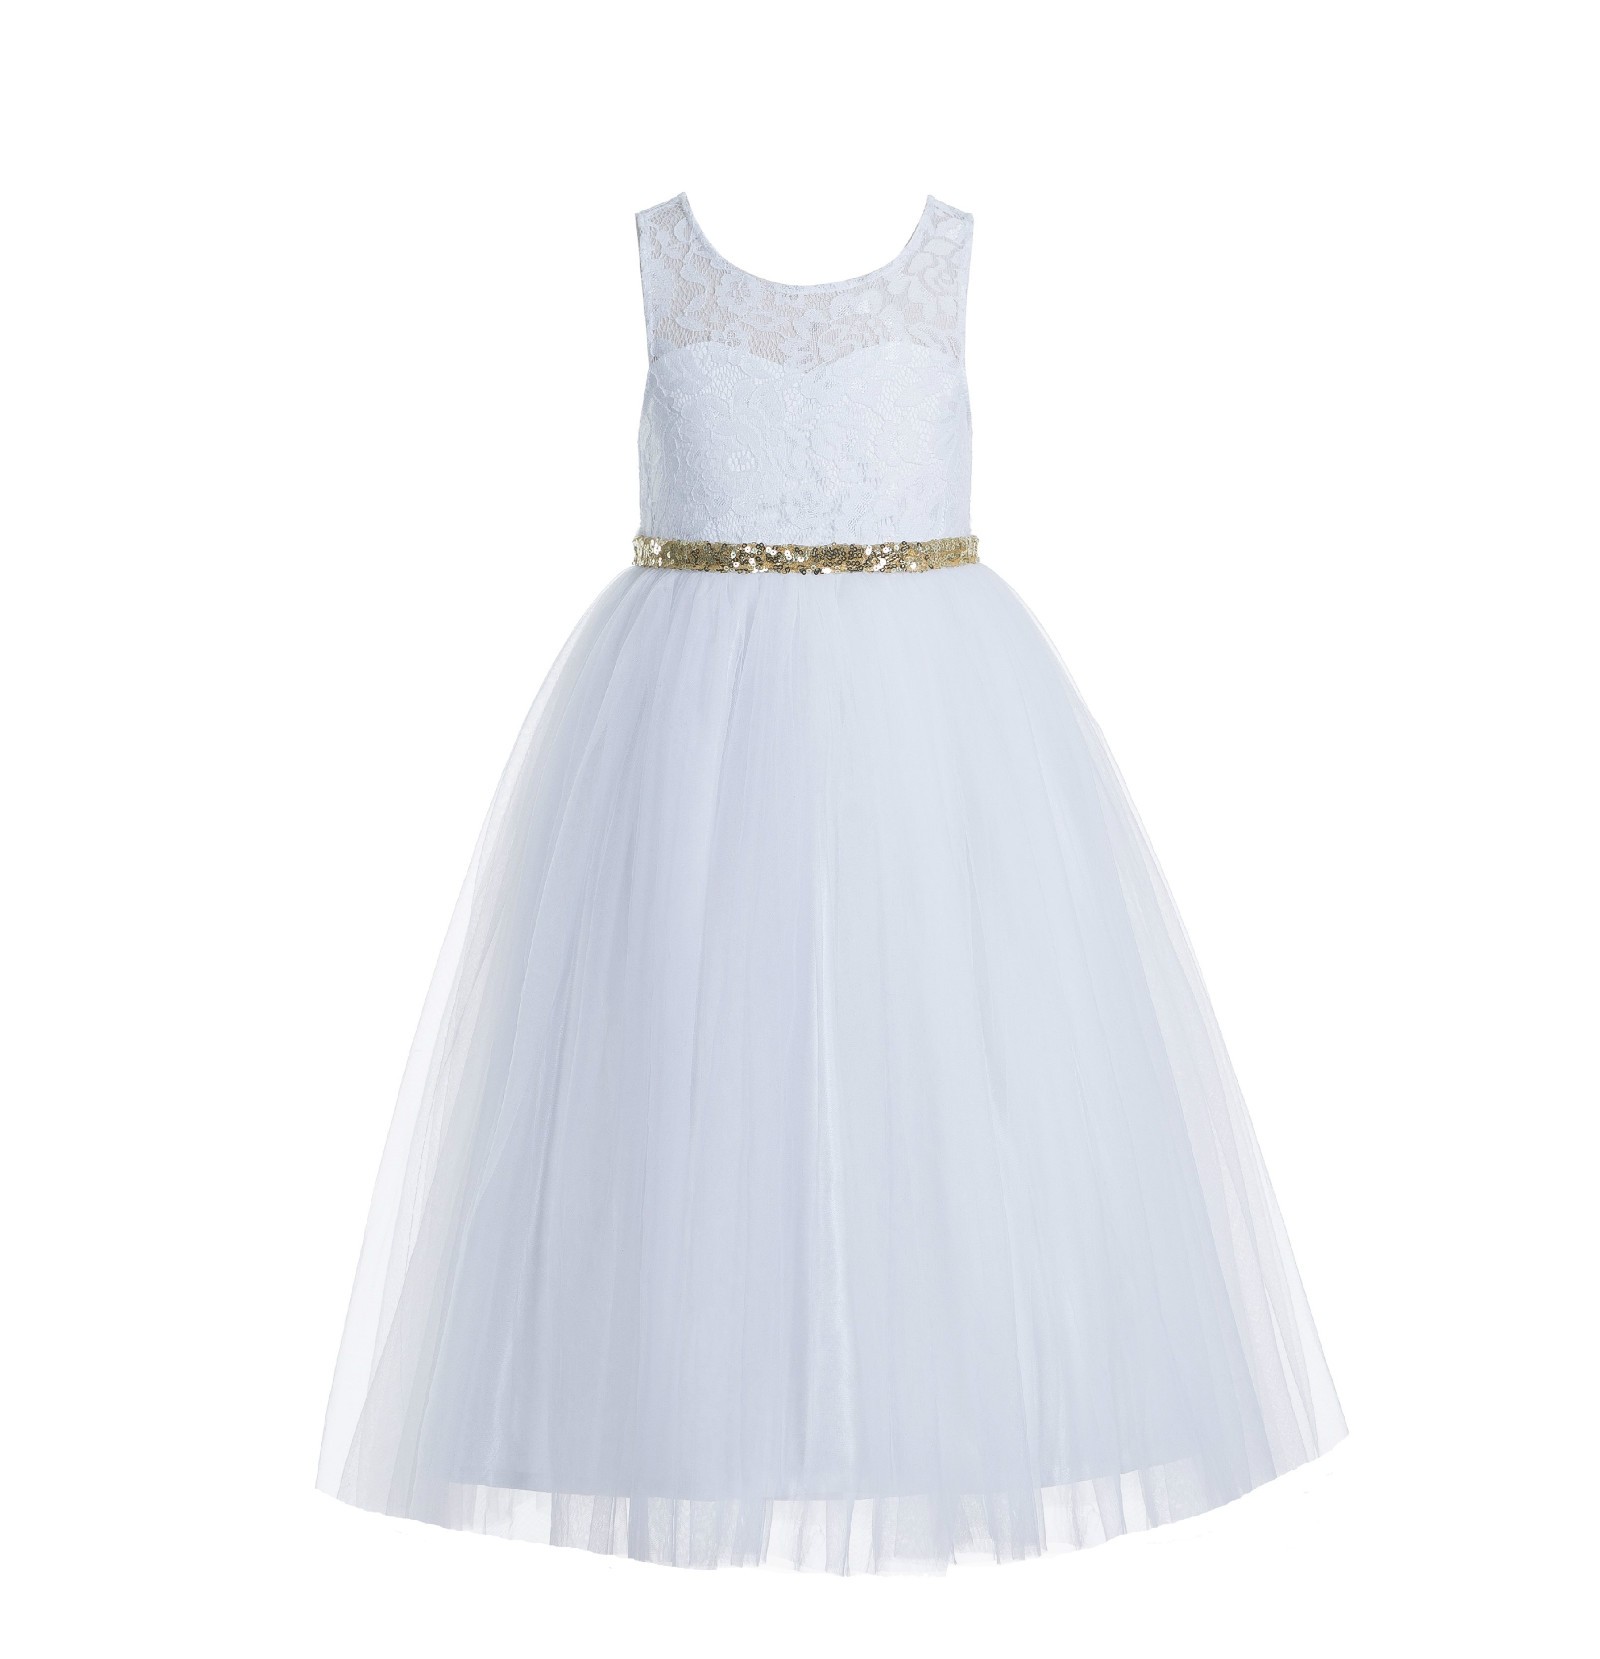 White / Gold Lace Tulle Scoop Neck Keyhole Back A-Line Flower Girl Dress 178